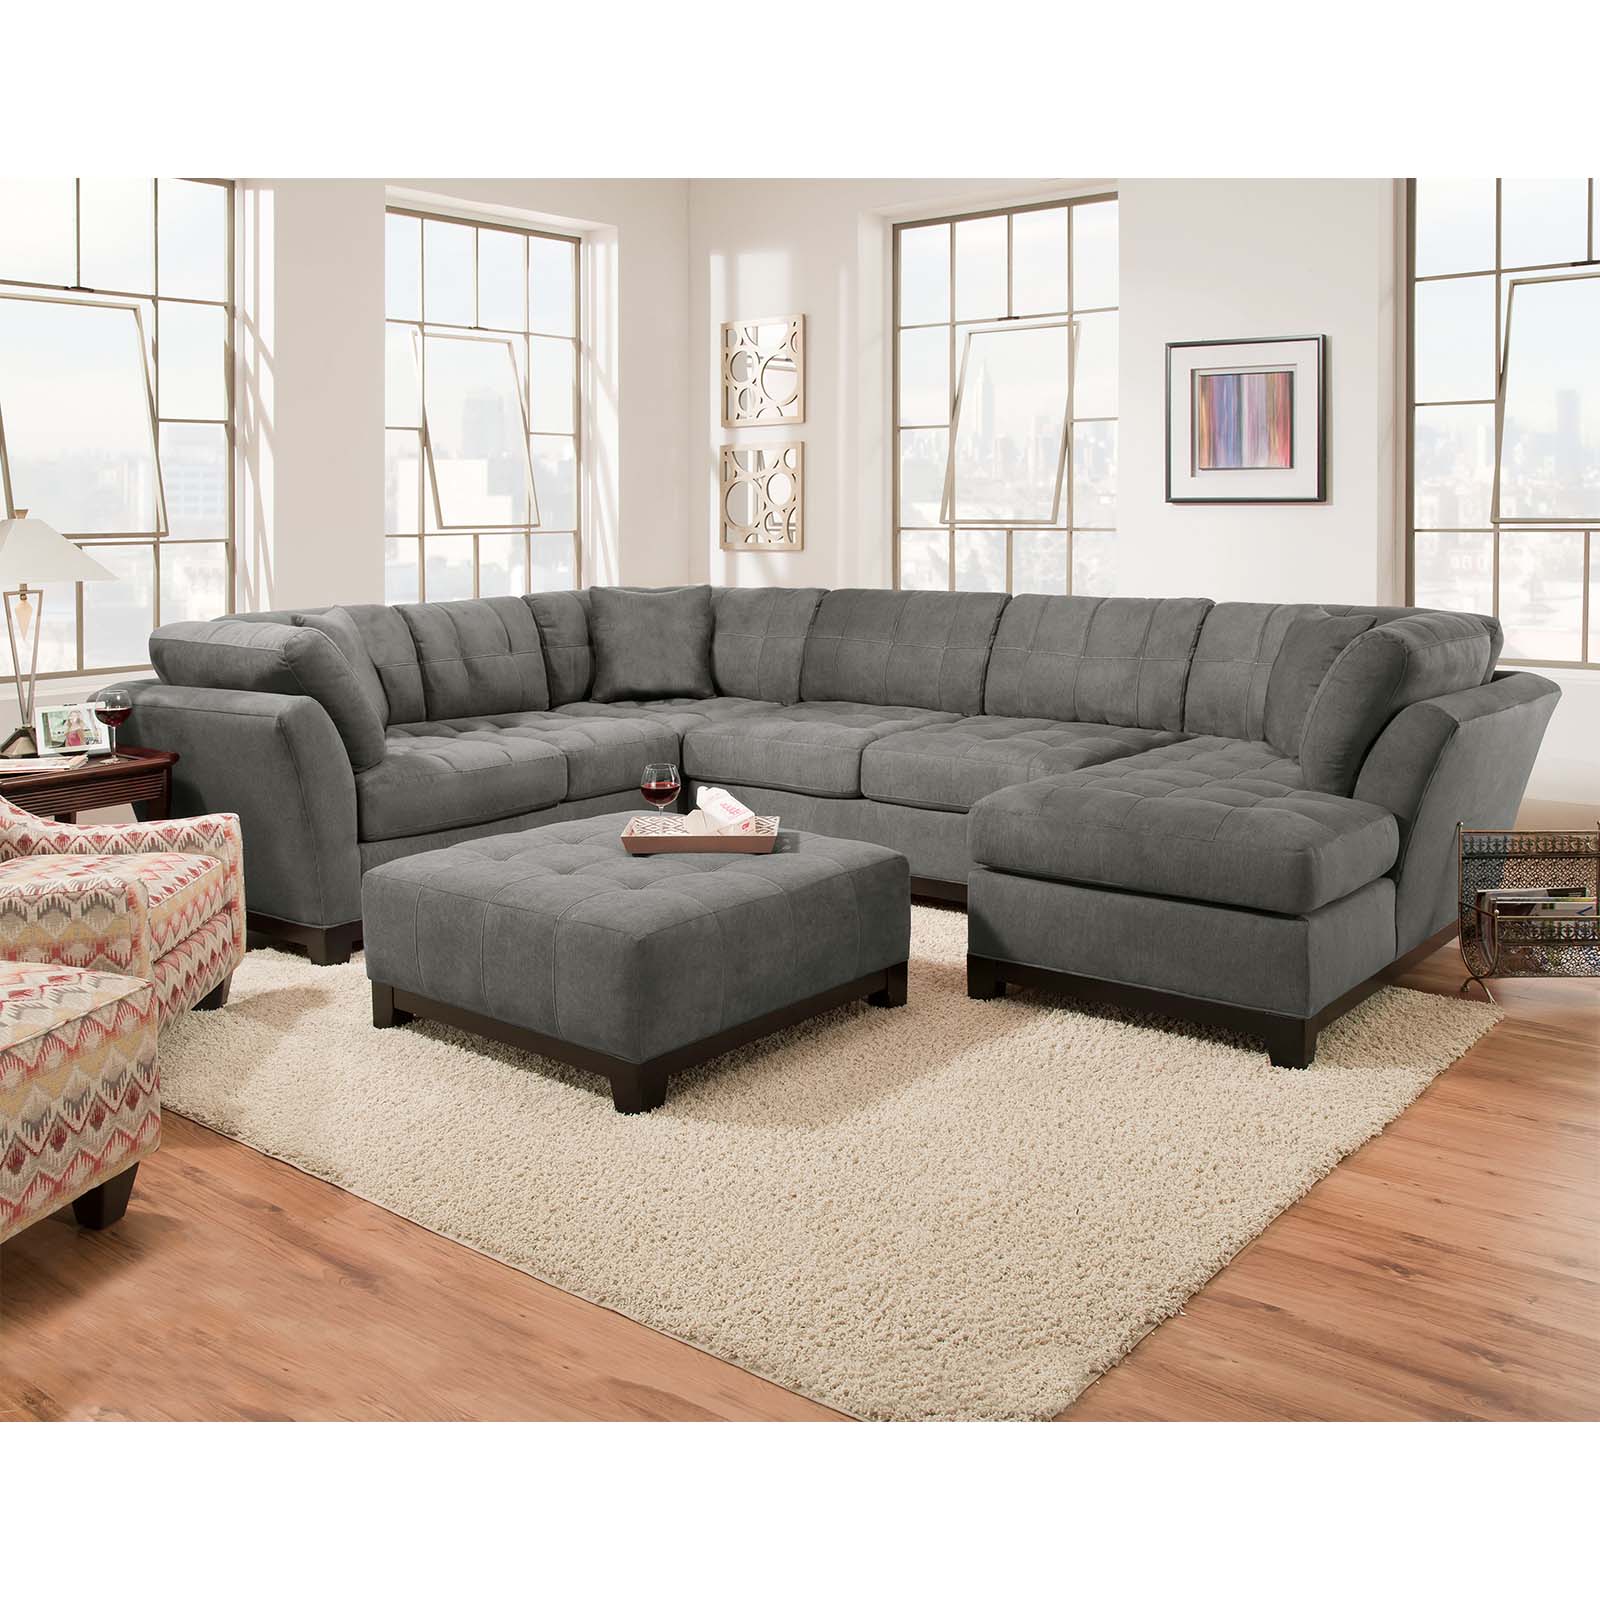 Corinthian Furniture Loxley Right Side Facing Chaise Sectional